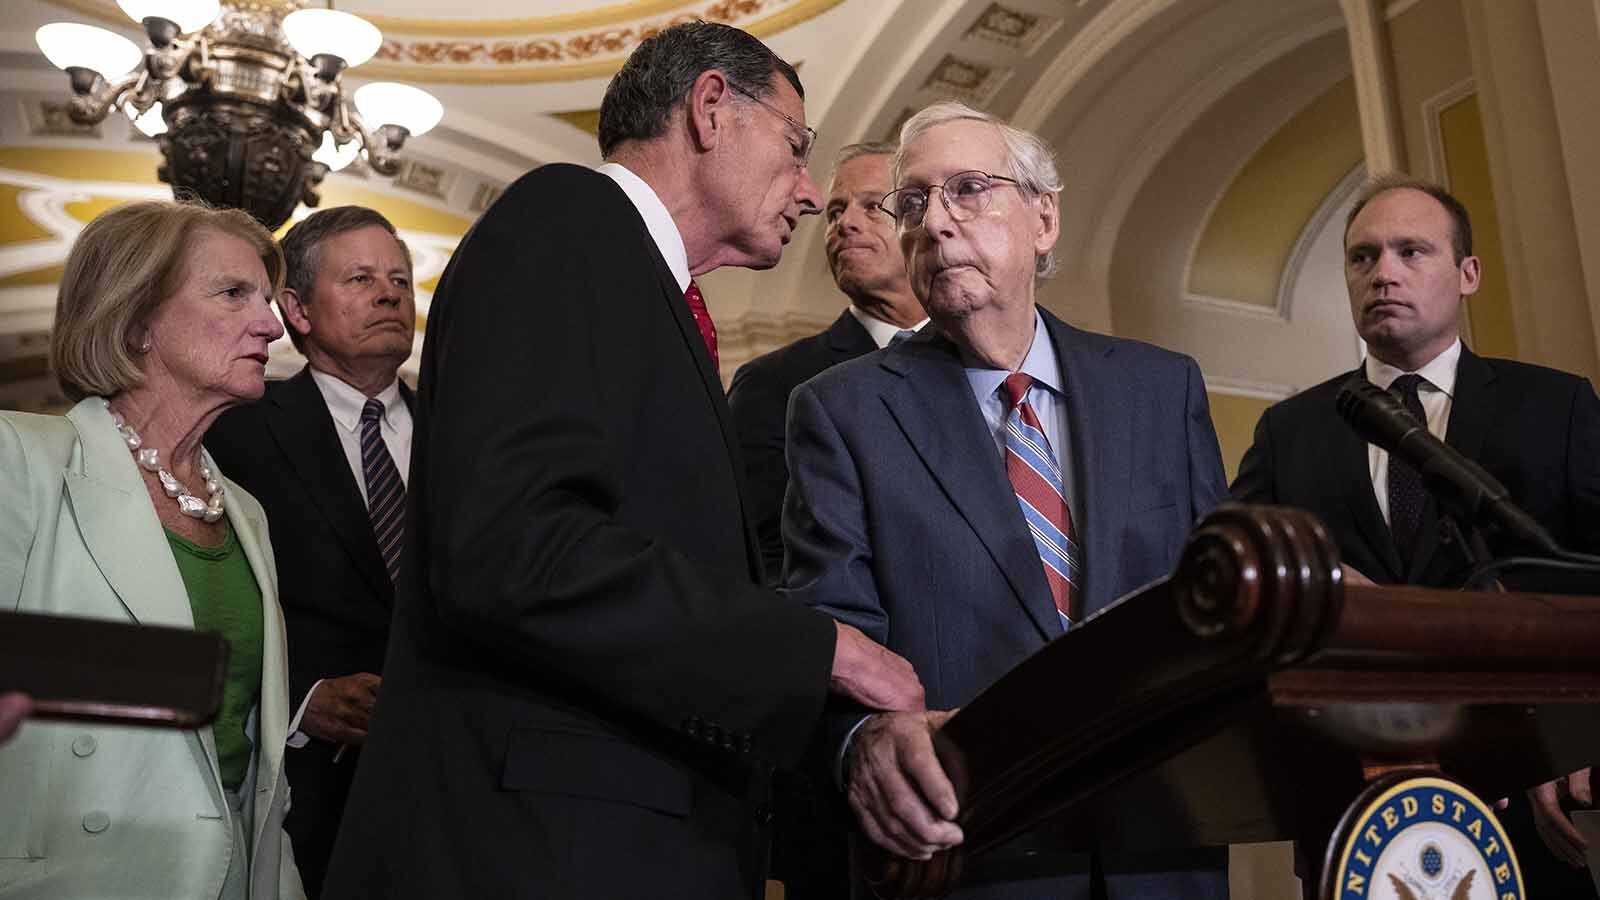 Wyoming U.S. Sen. John Barrasso, left, helps U.S. Senate Minority Leader Mitch McConnell in July after McConnell suddenly froze up during a press conference. After another episode Wednesday, there's talk about who would succeed McConnell. As the No. 3 Republican in the Senate, Barrasso is near the top of the list.